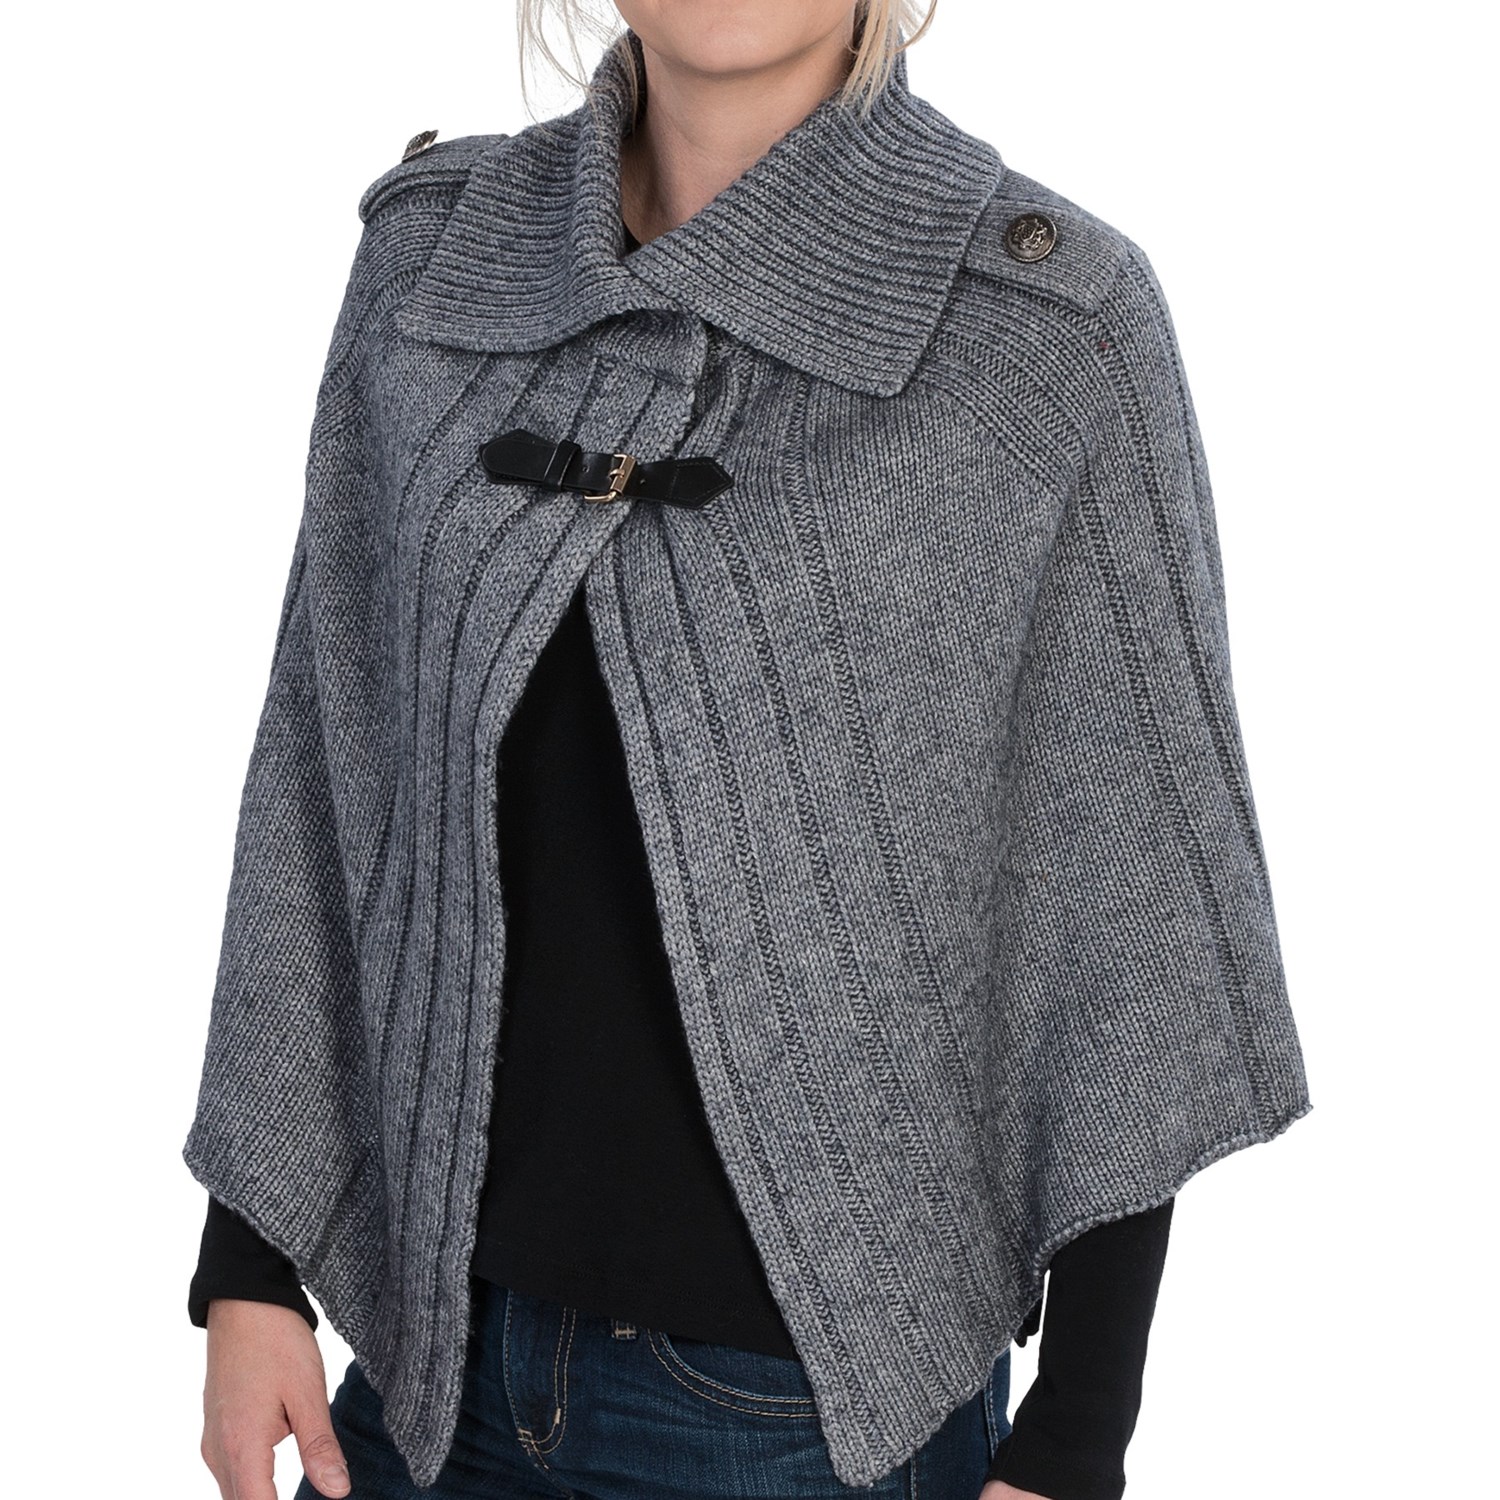 La Fiorentina Wool Capelet Sweater - Leather Strap (For Women) in Grey